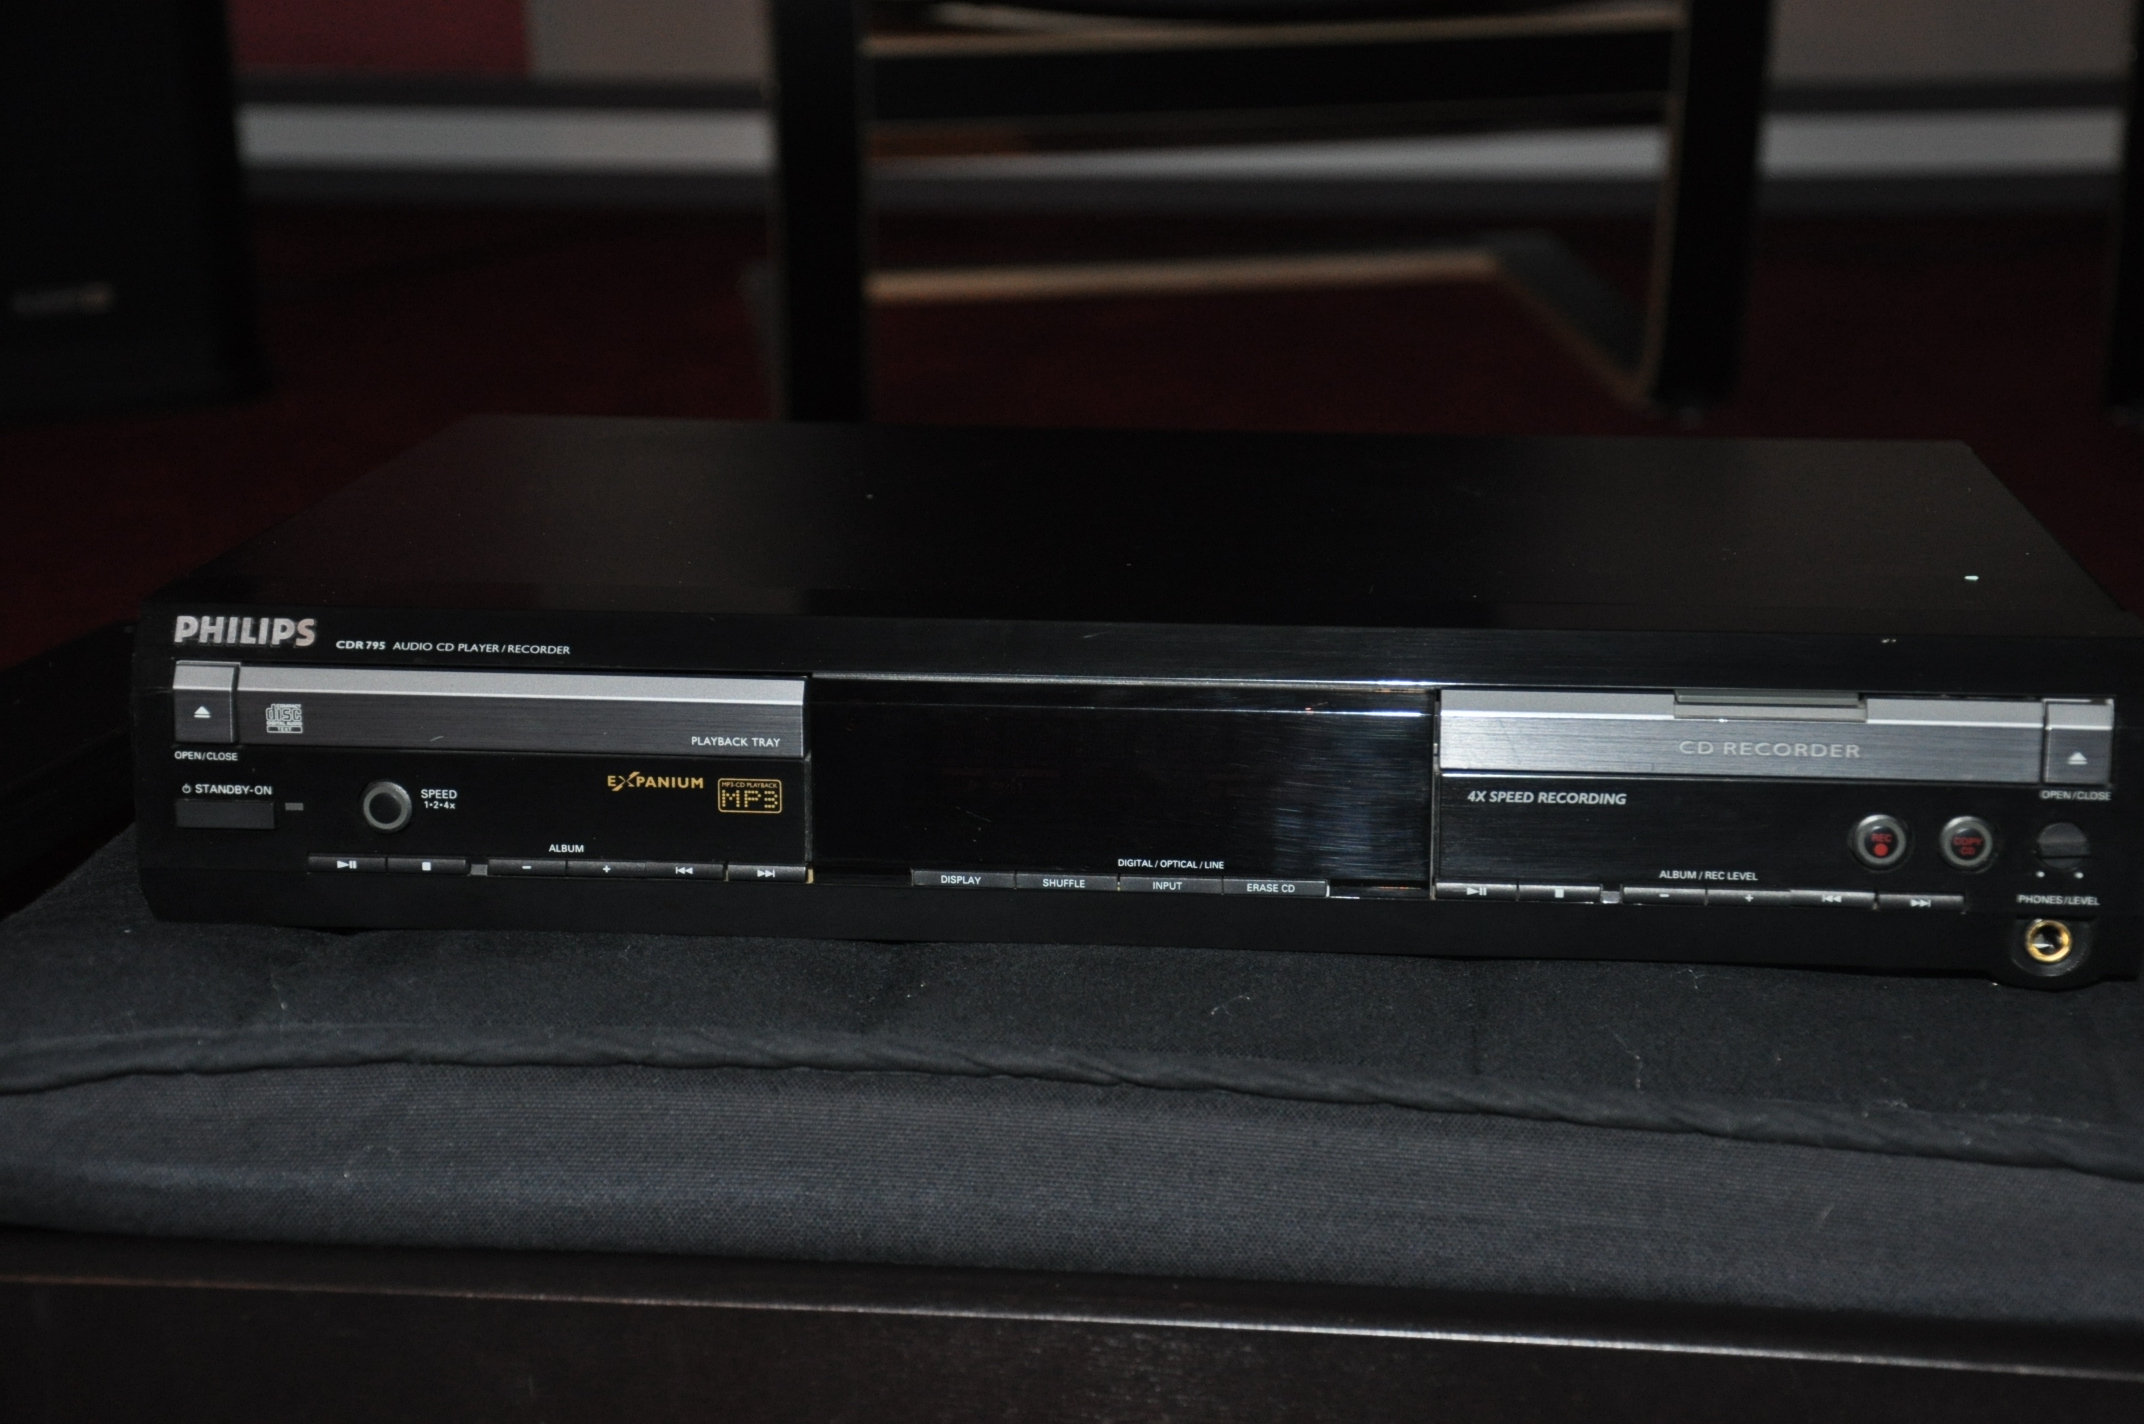 Philips Cdr 795 Audio Cd Player Recorder User Manual